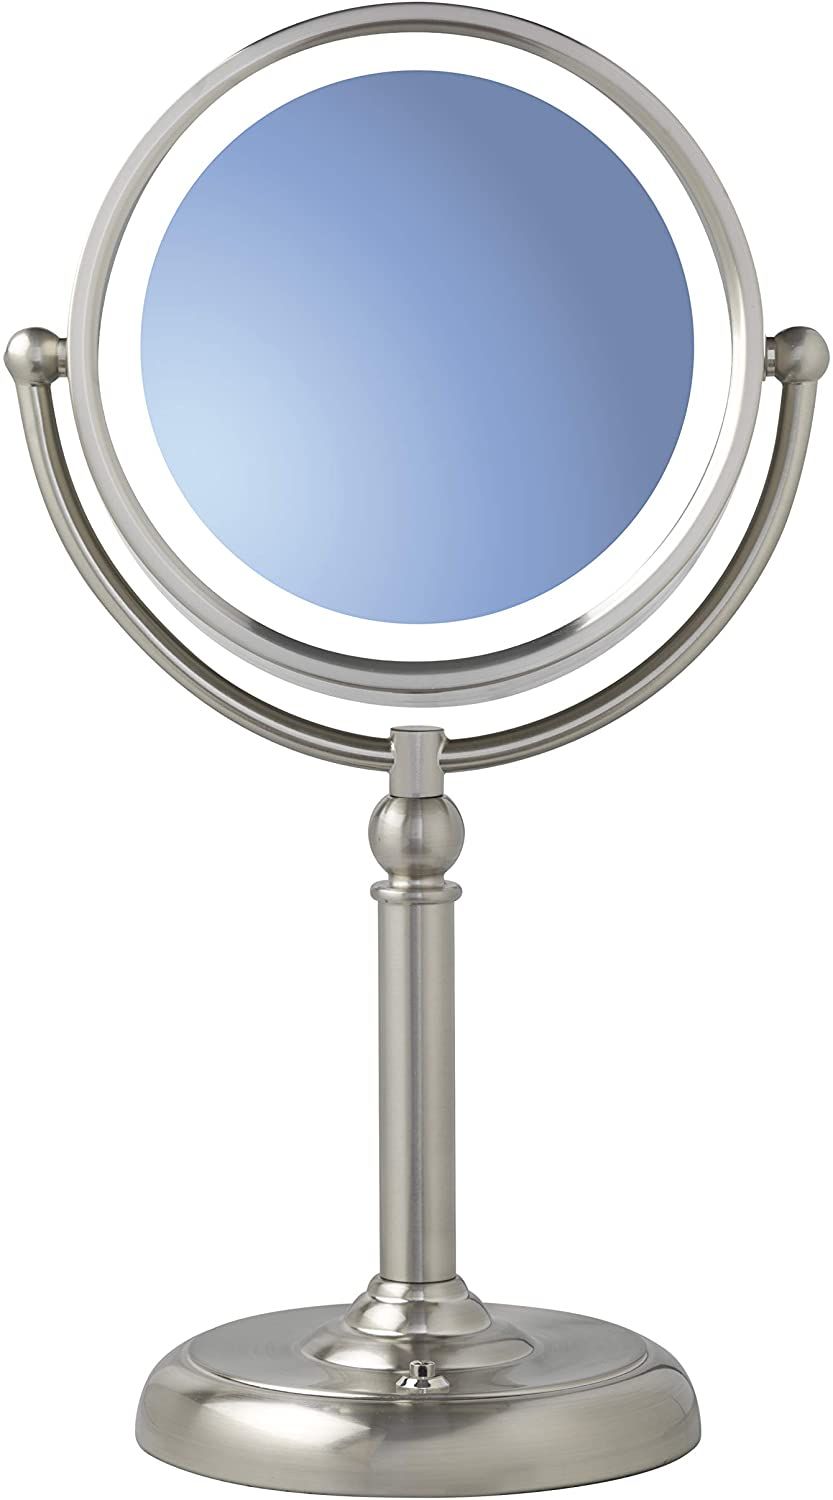 Sunter Led Vanity Mirror Brushed Nickel, Two Sided 1x/10x Magnification Inside Single Sided Polished Nickel Wall Mirrors (View 9 of 15)